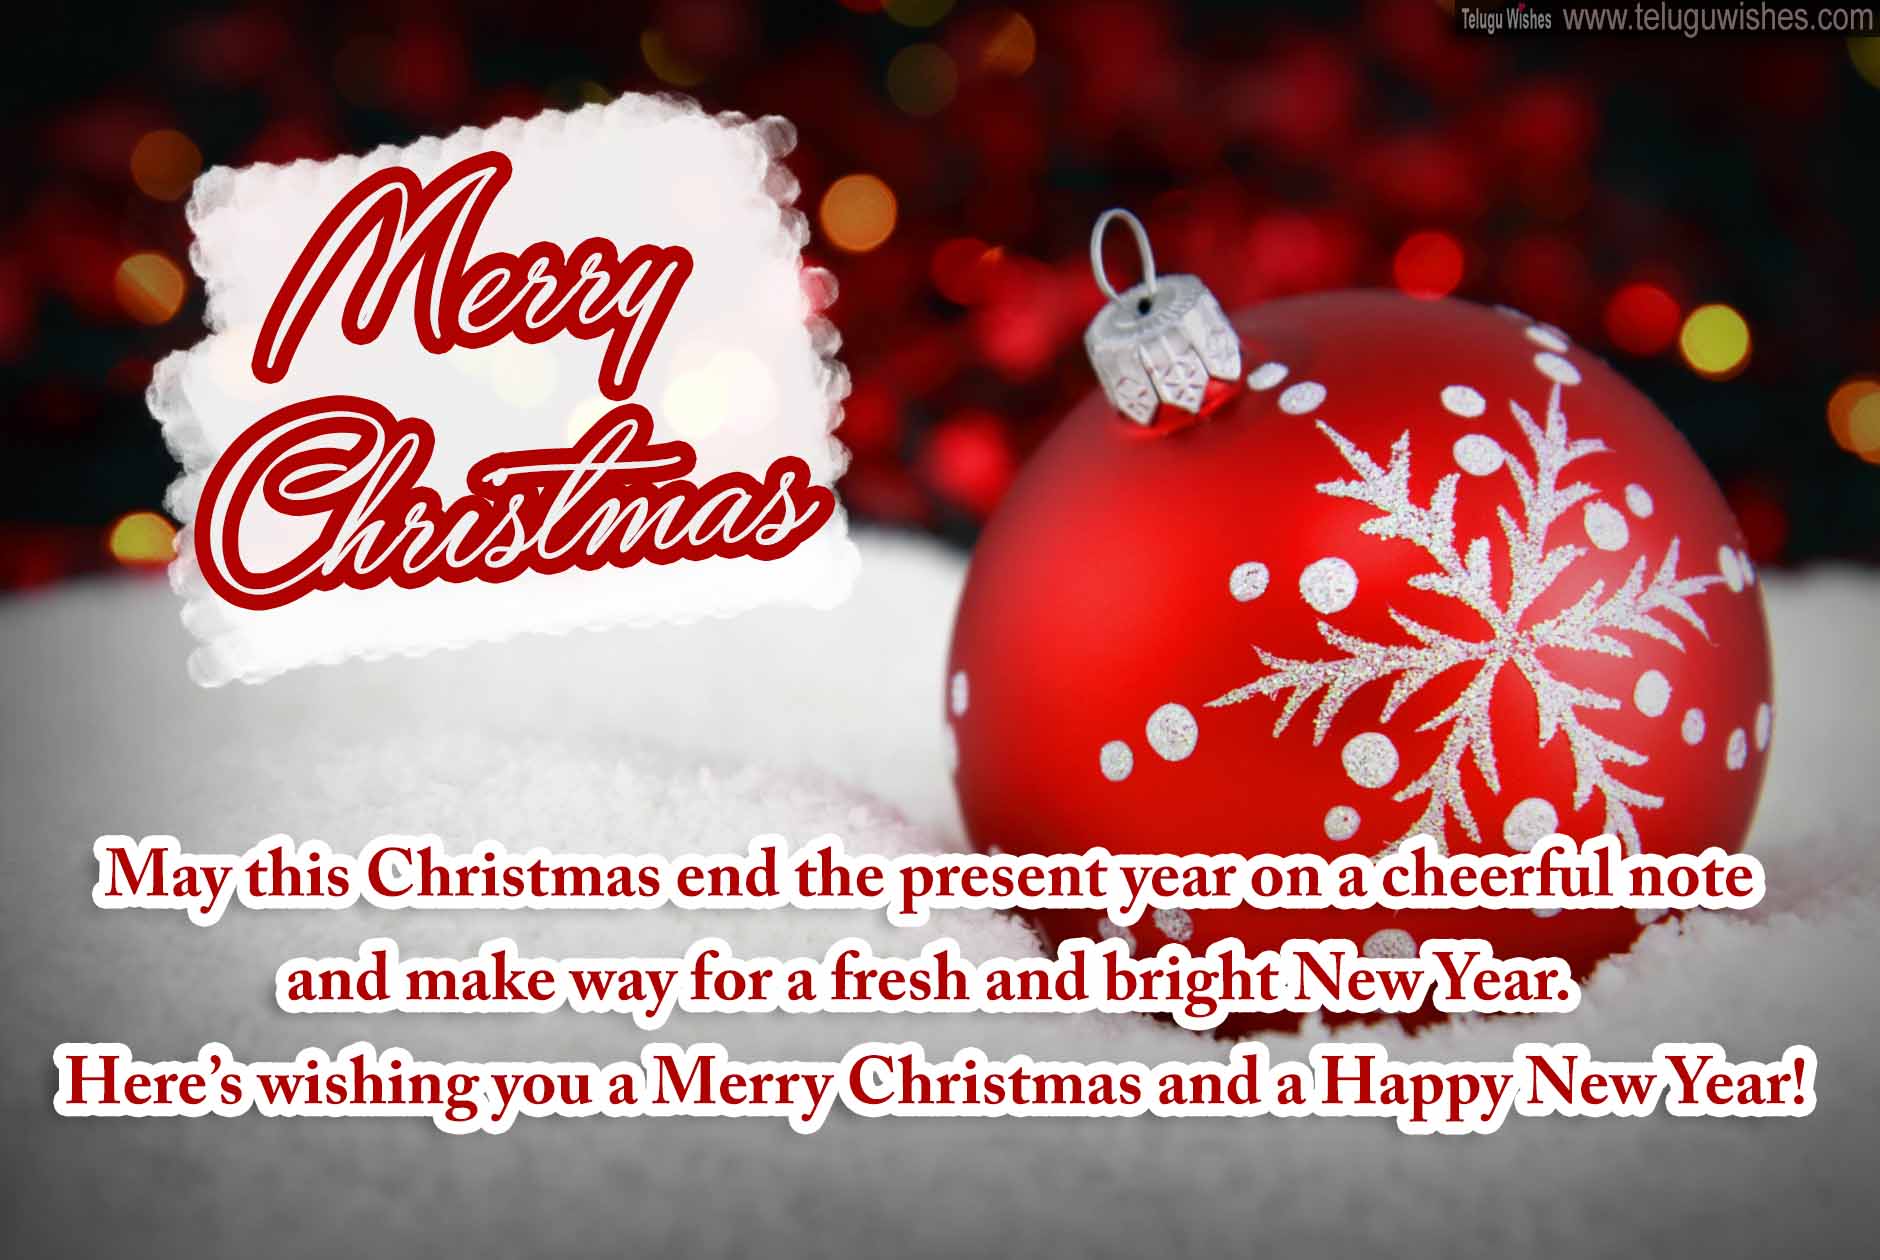 Merry Christmas wishes Images